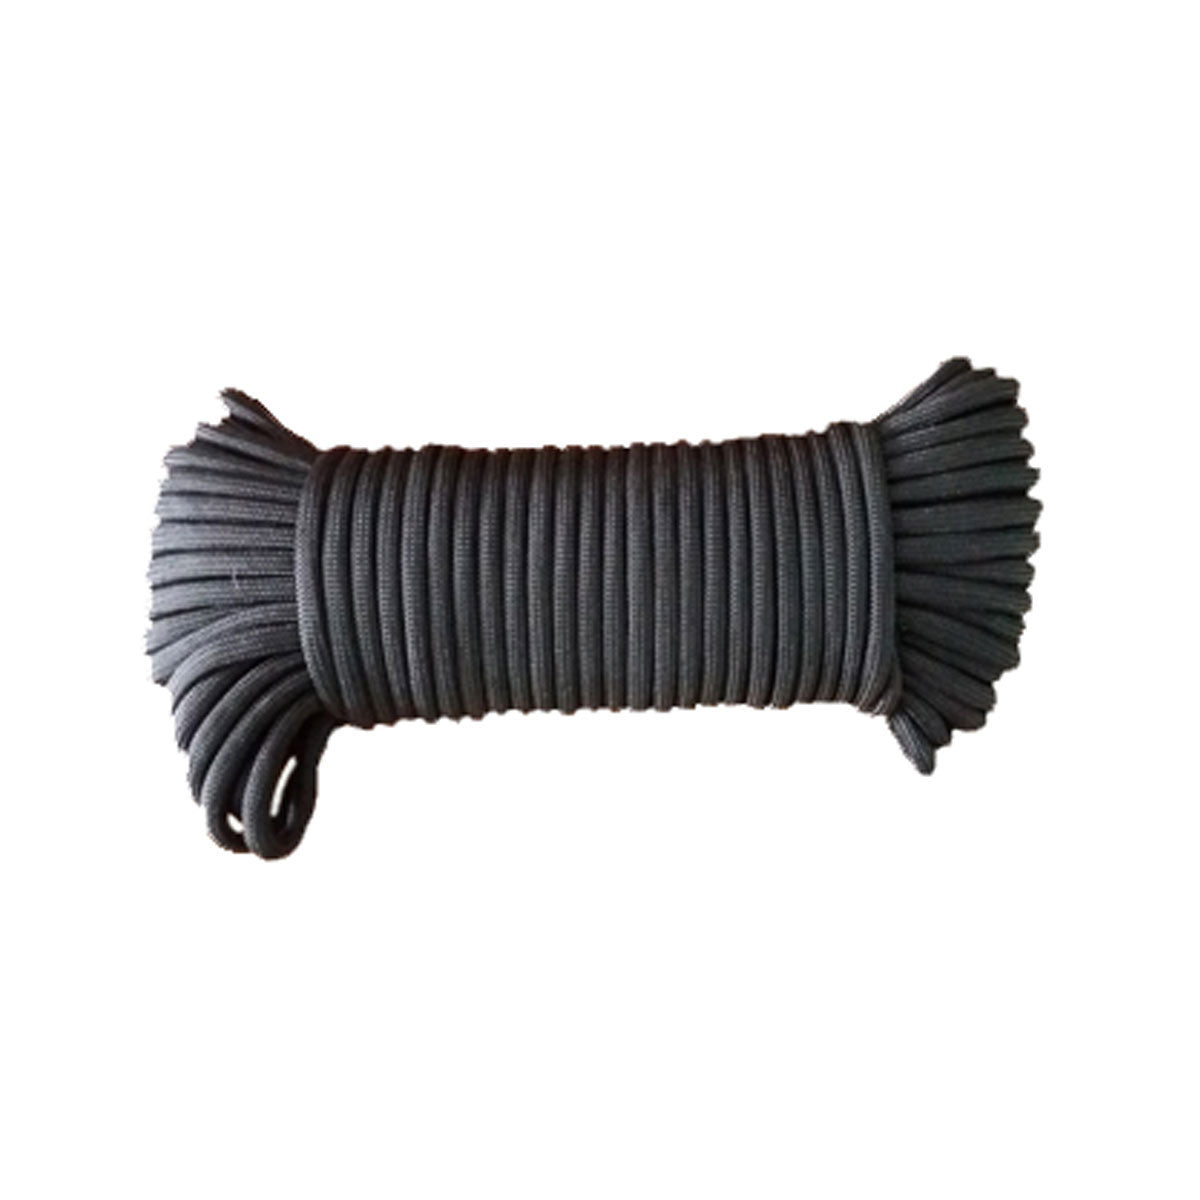 QuipCo S.O.S Paracord - High Strength Utility Cord